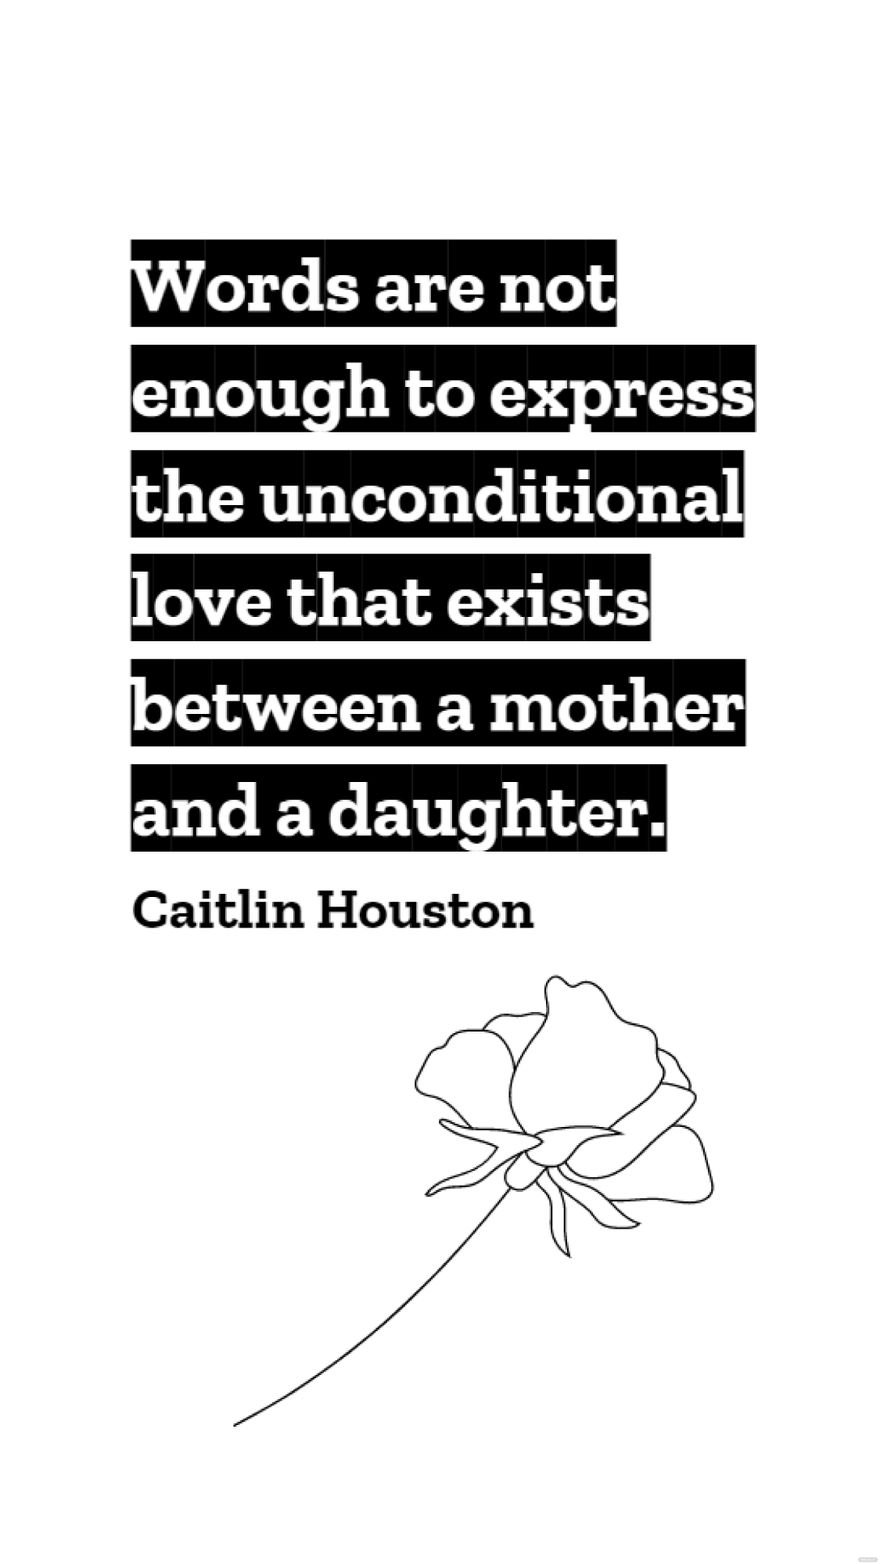 Caitlin Houston - Words are not enough to express the unconditional love that exists between a mother and a daughter.